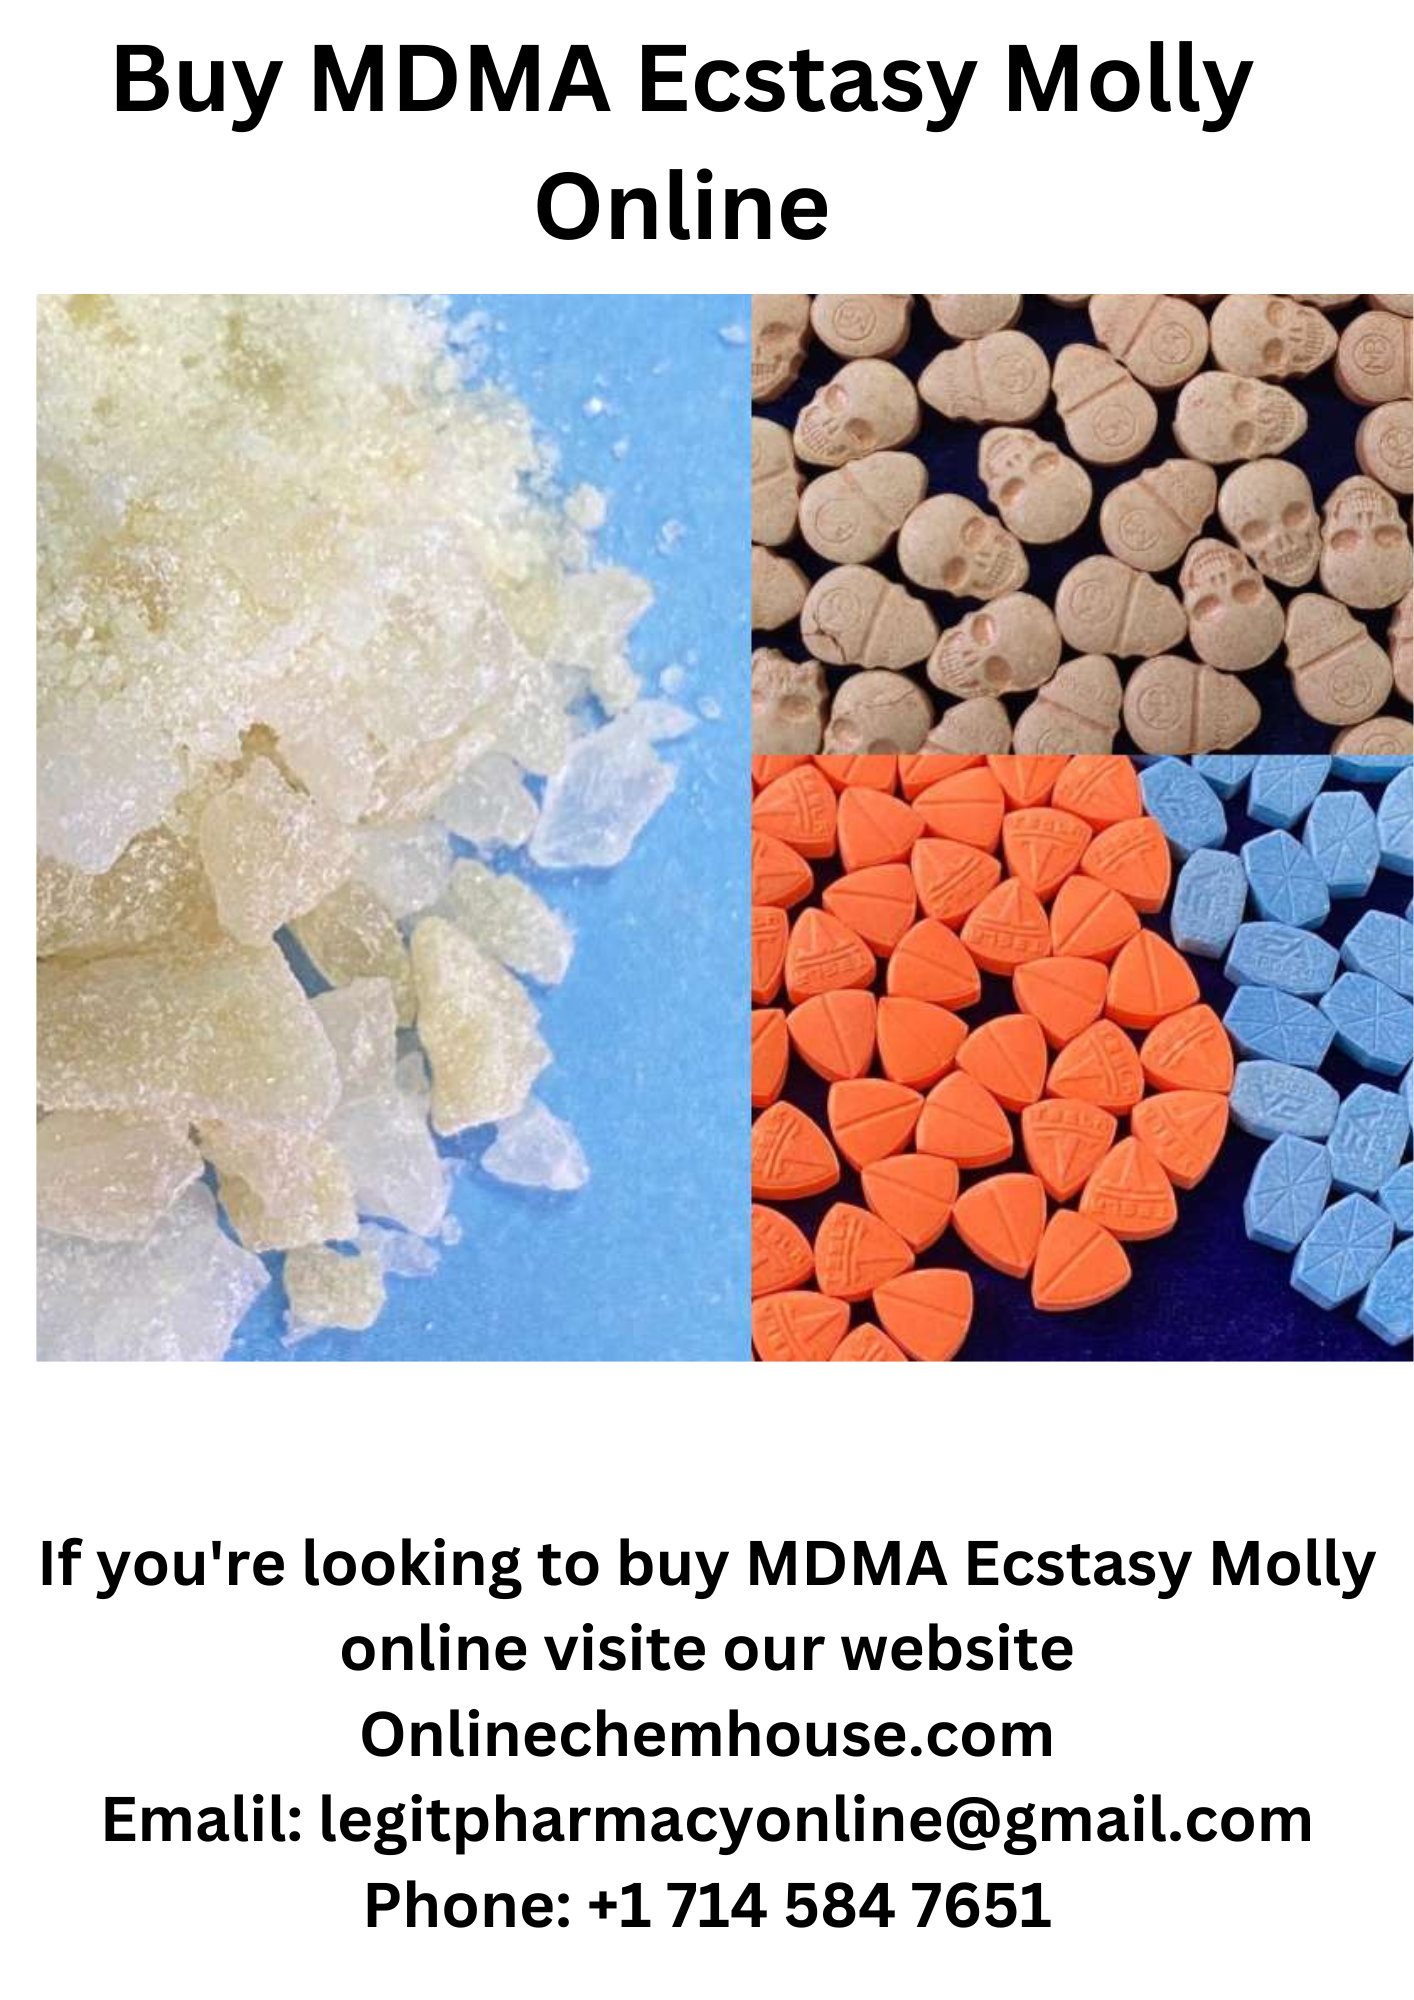 Buy XTC MDMA Online At Onlinechemhouse.com